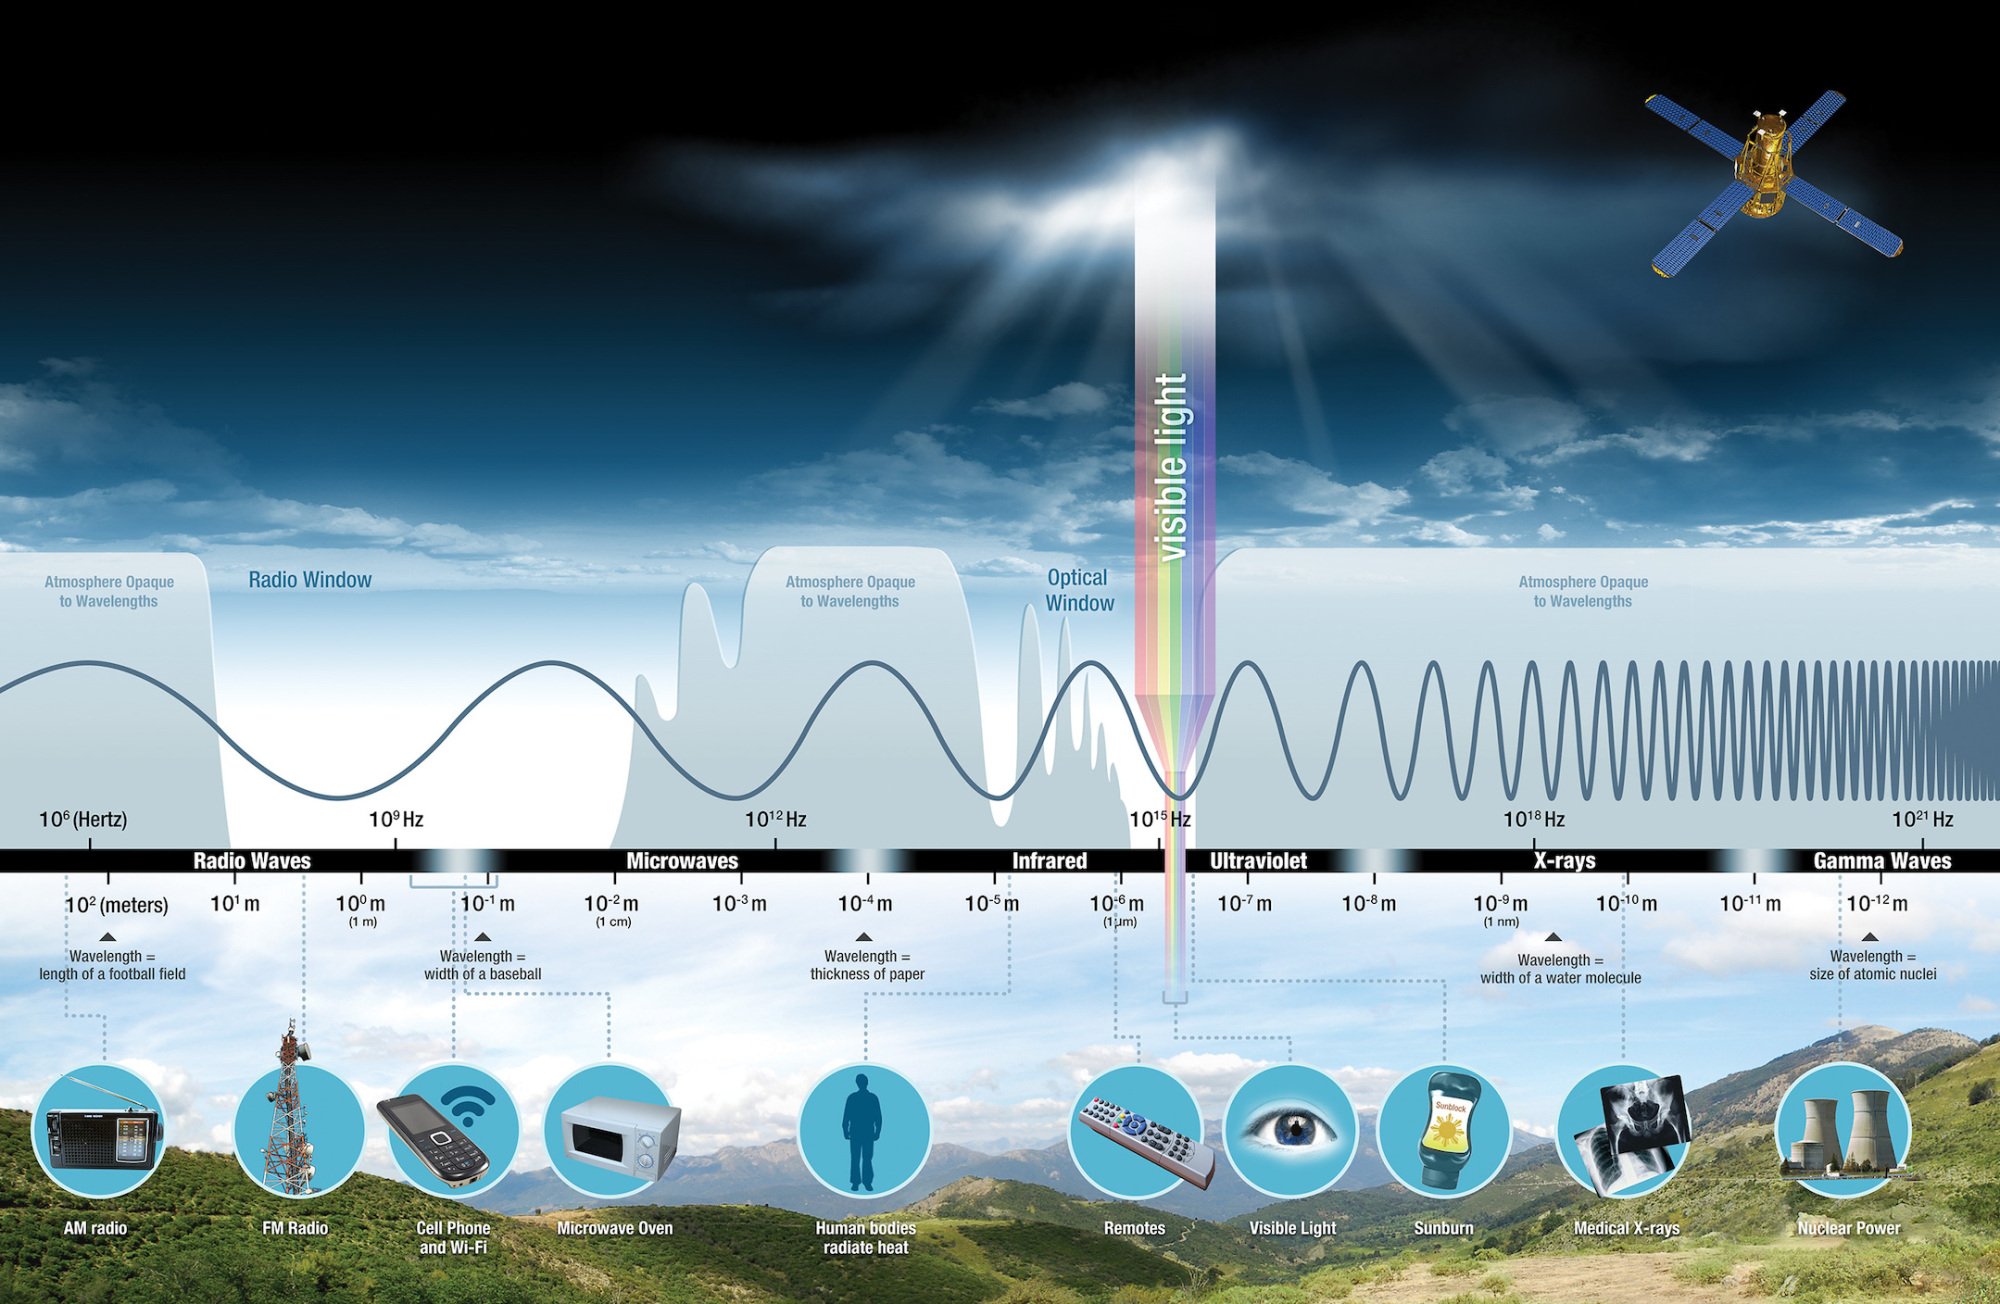 The electromagnetic spectrum that shows all wavelengths of light, such as visible light, infrared, ultraviolet, and more.